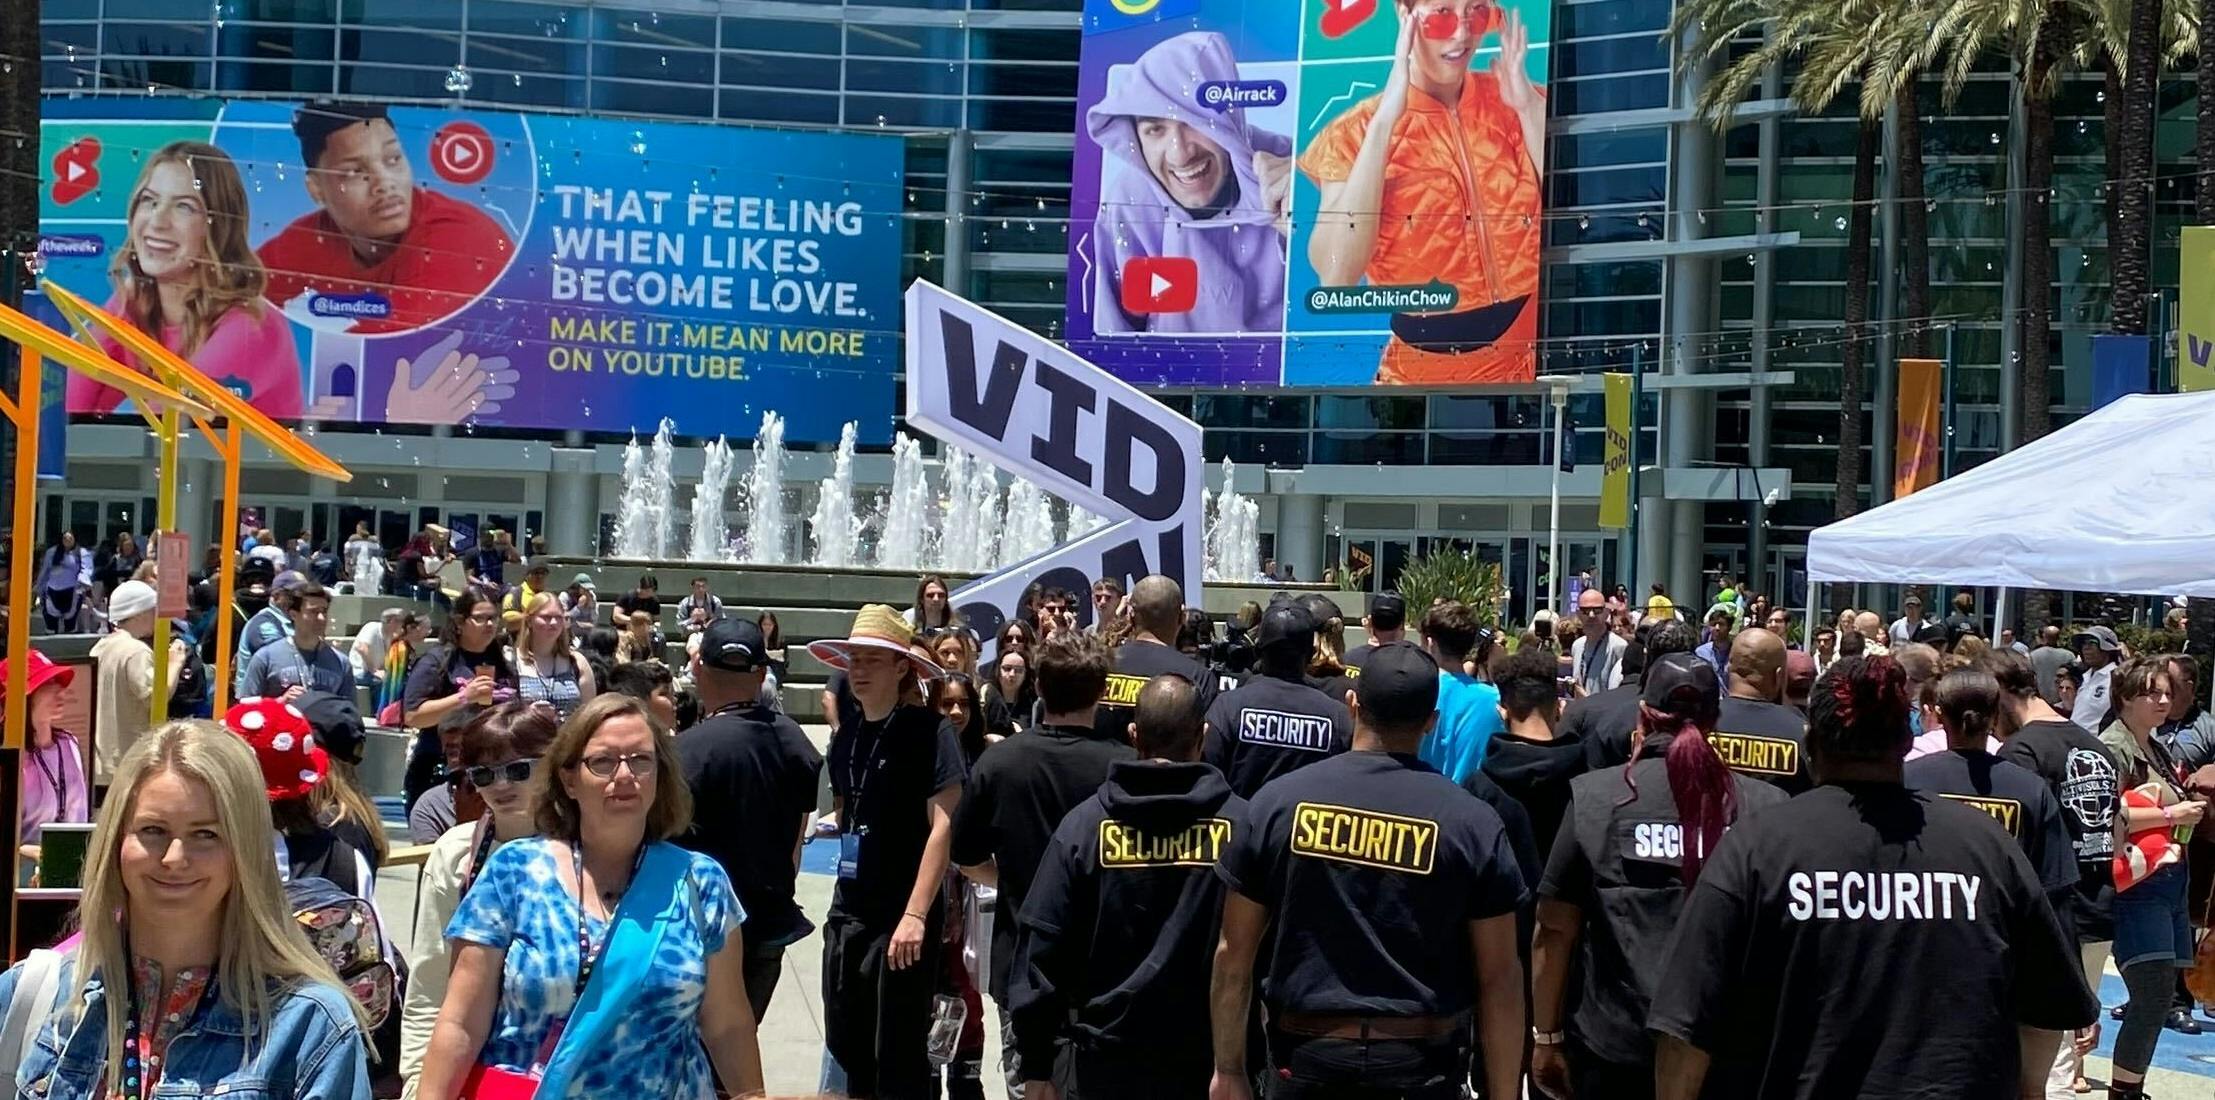 Is Logan Paul at VidCon? No, but screaming fans seem to think so